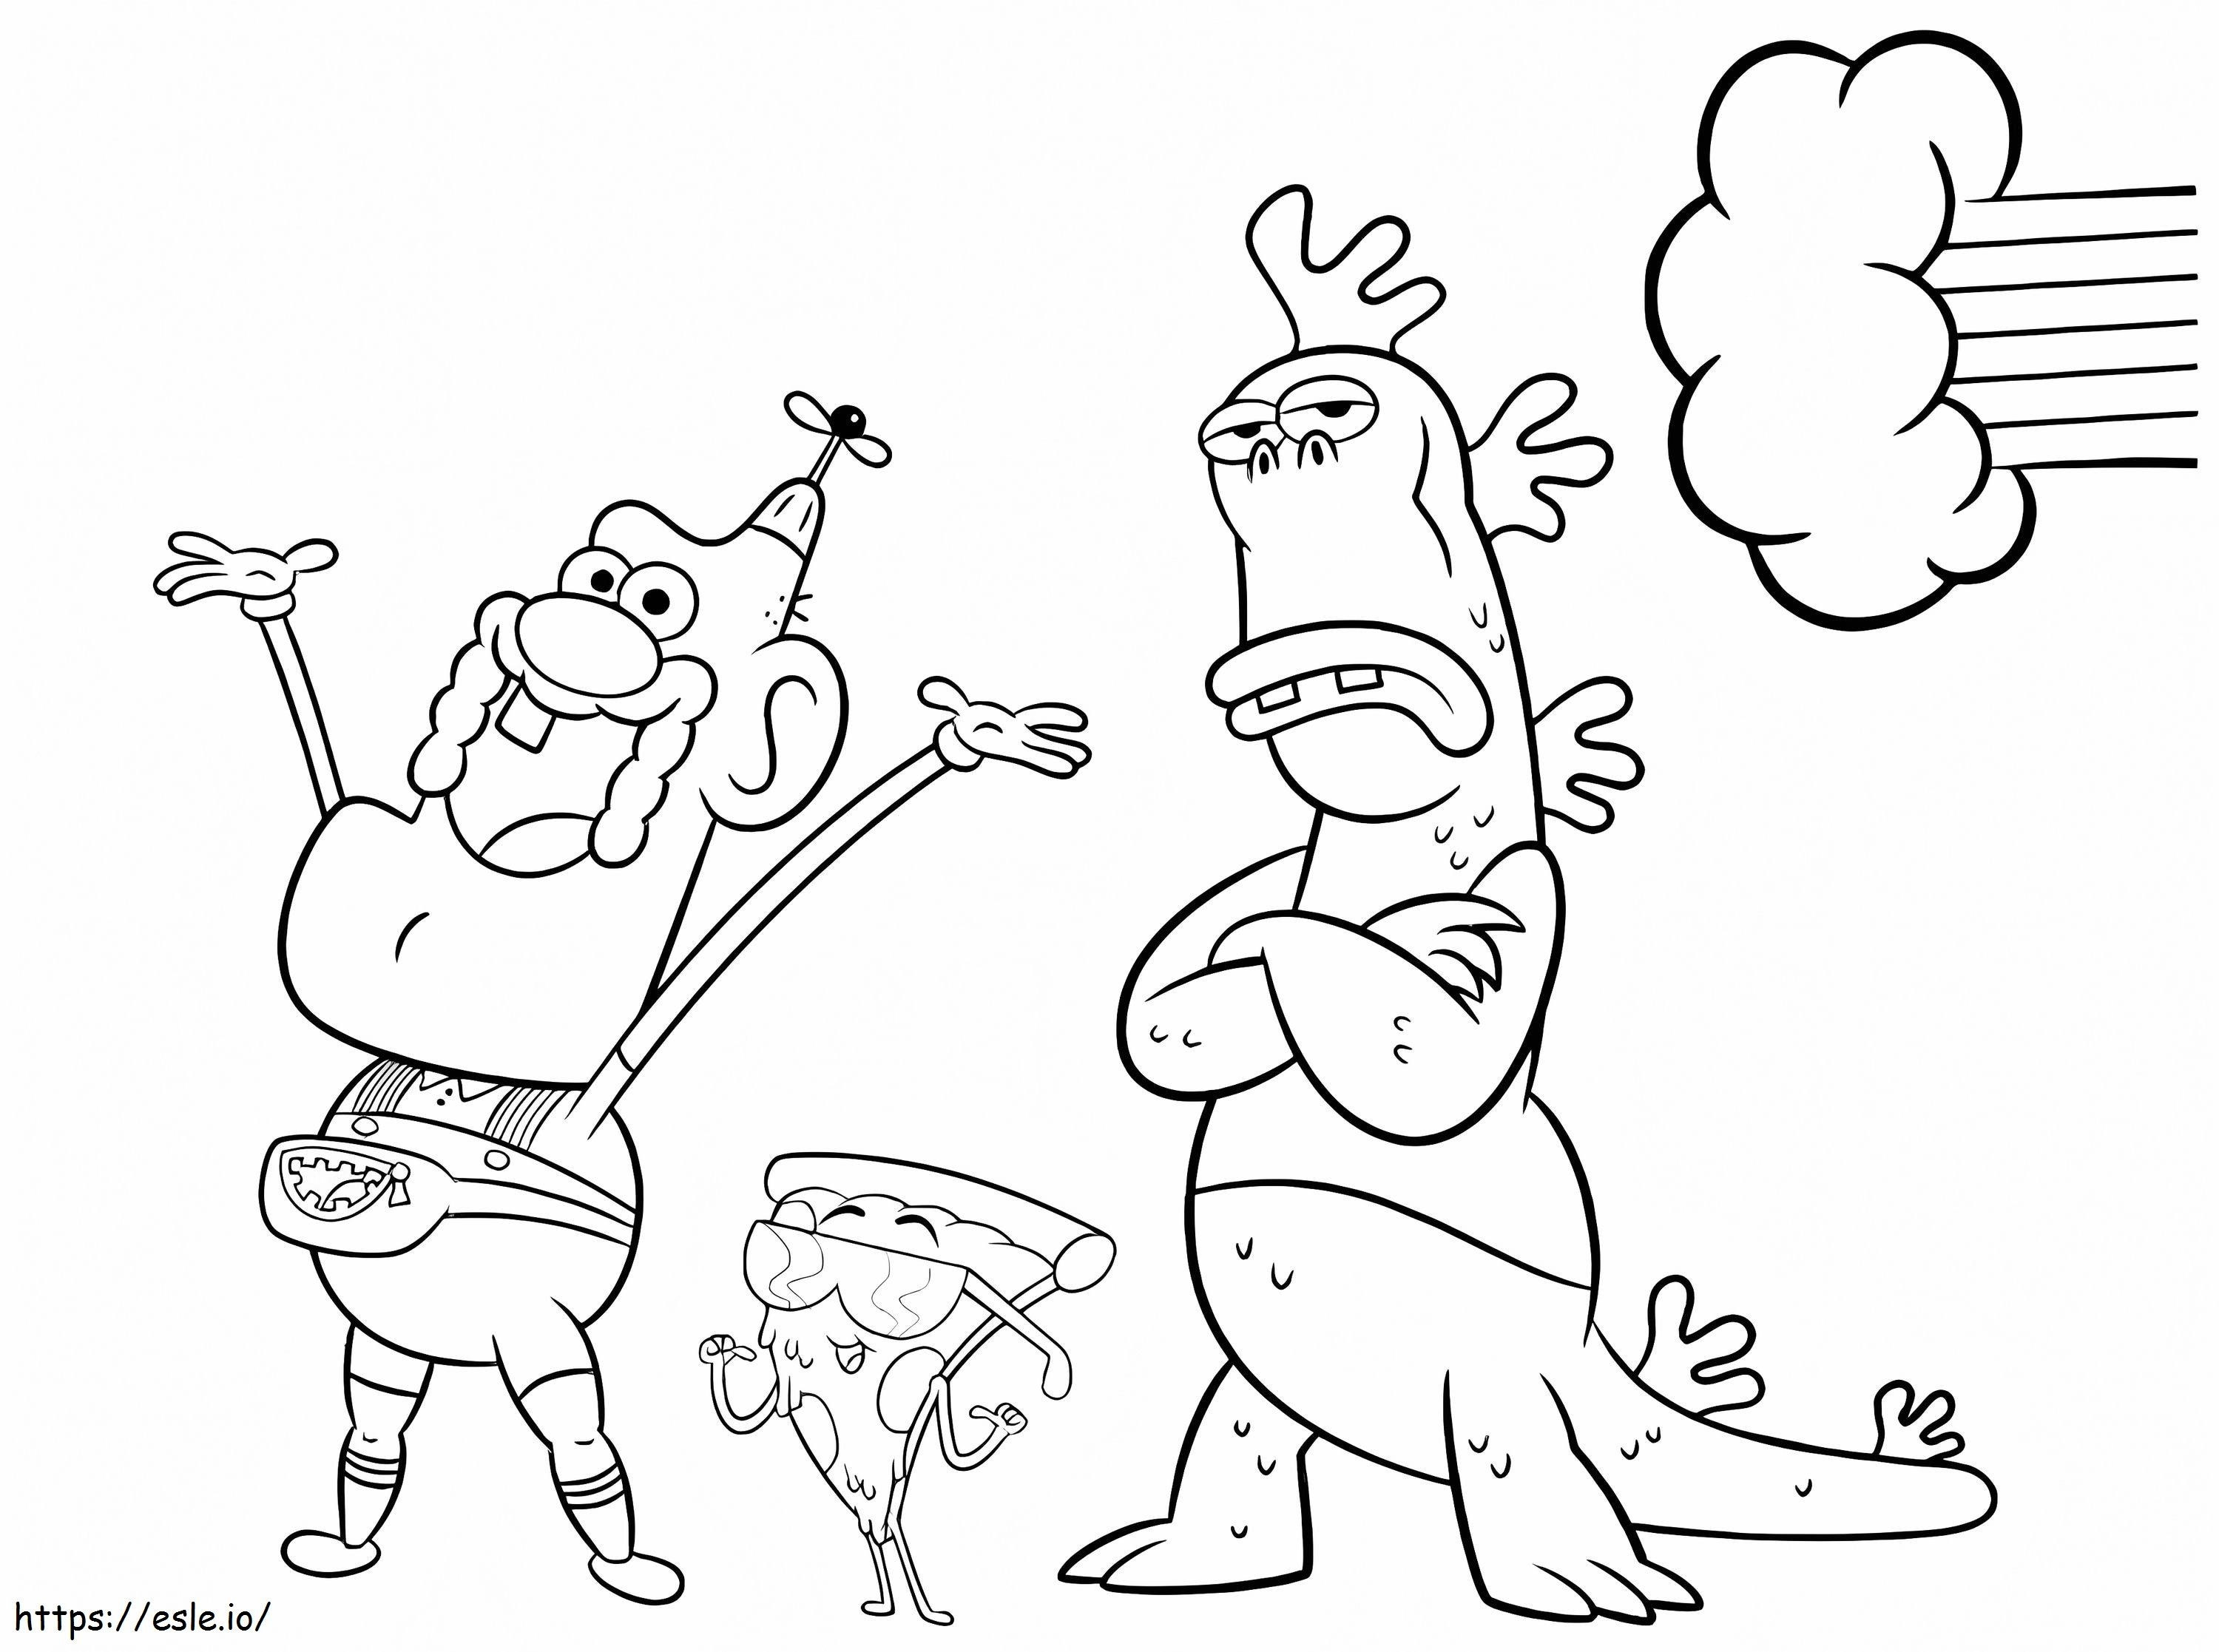 『From Uncle Grandpa』の登場人物 ぬりえ - 塗り絵